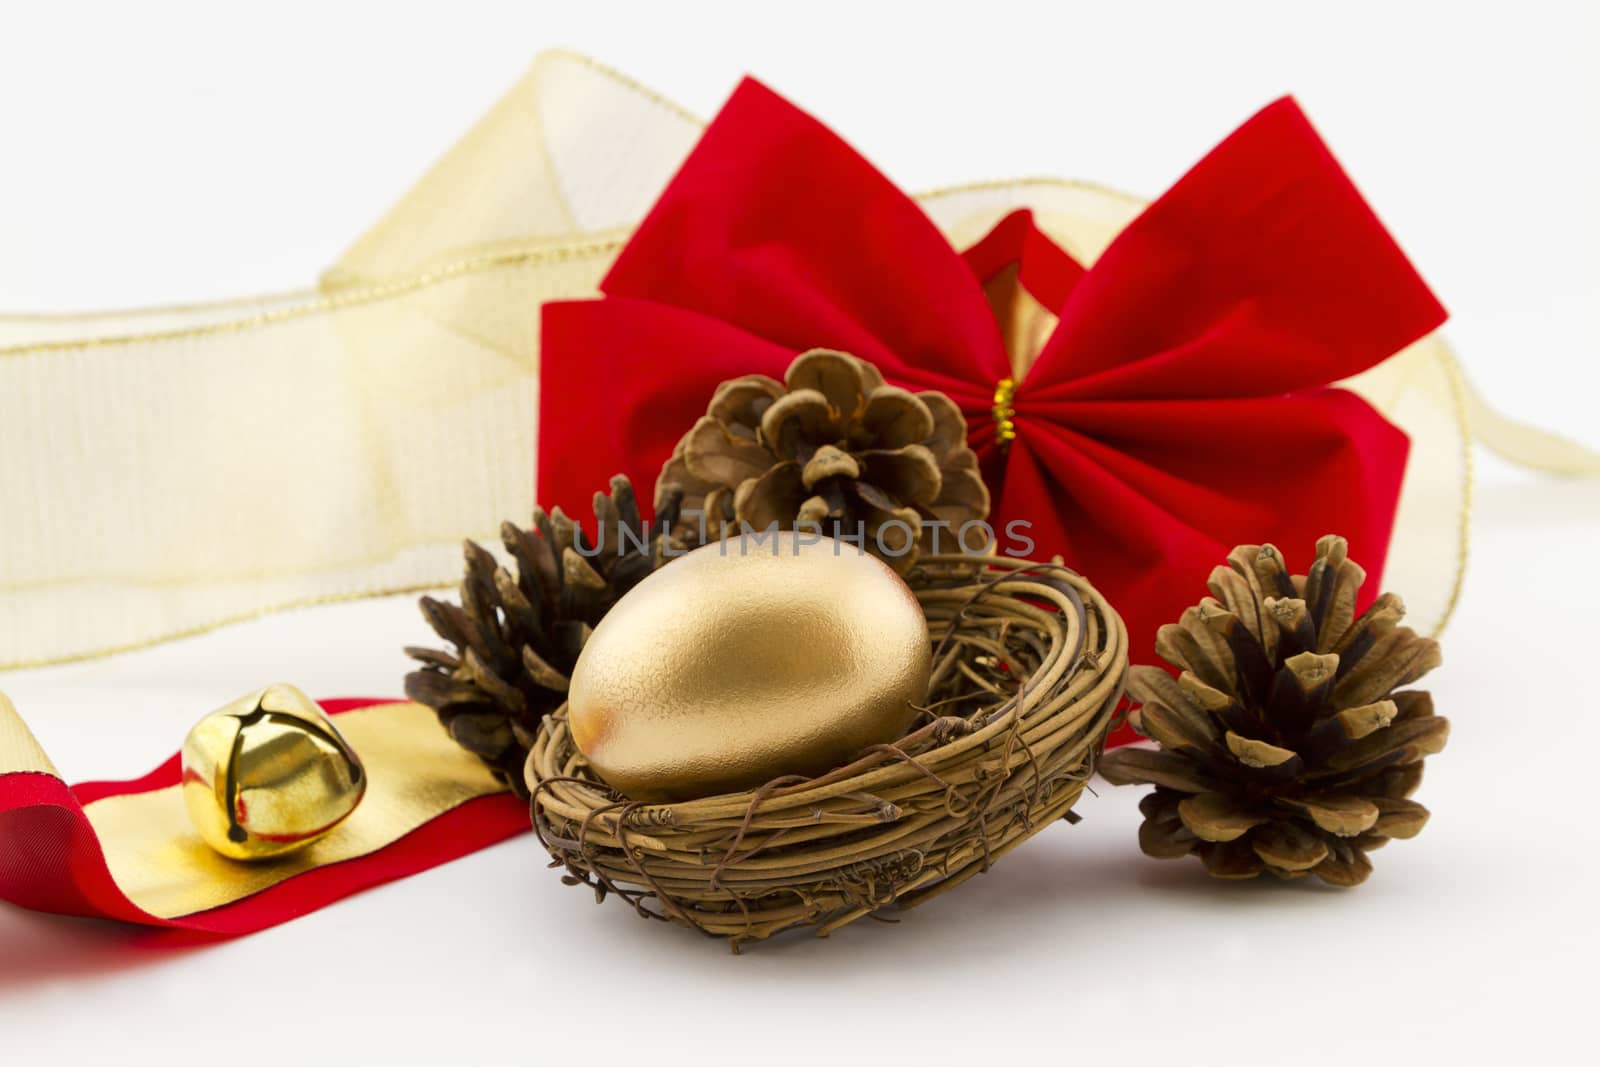 Gold nest egg with pine cones and ribbons by fmcginn